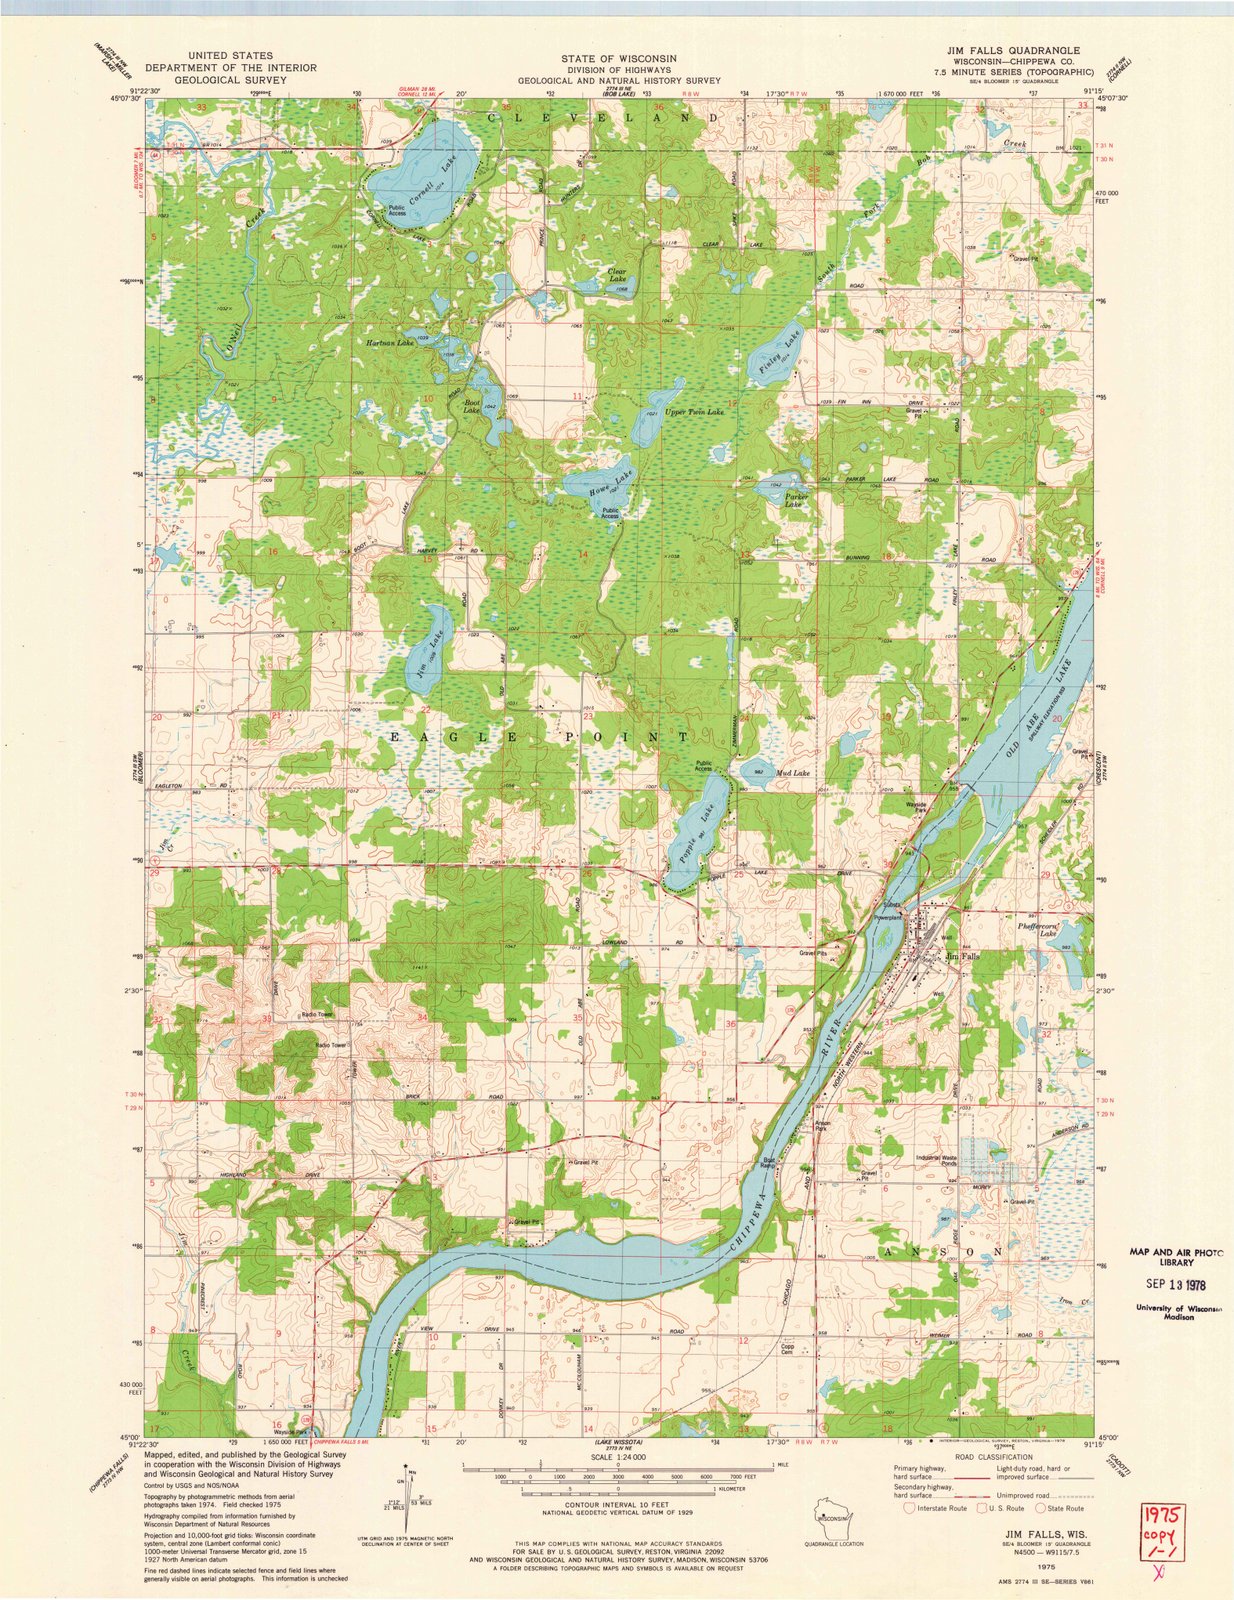 1975 Jim Falls, WI - Wisconsin - USGS Topographic Map